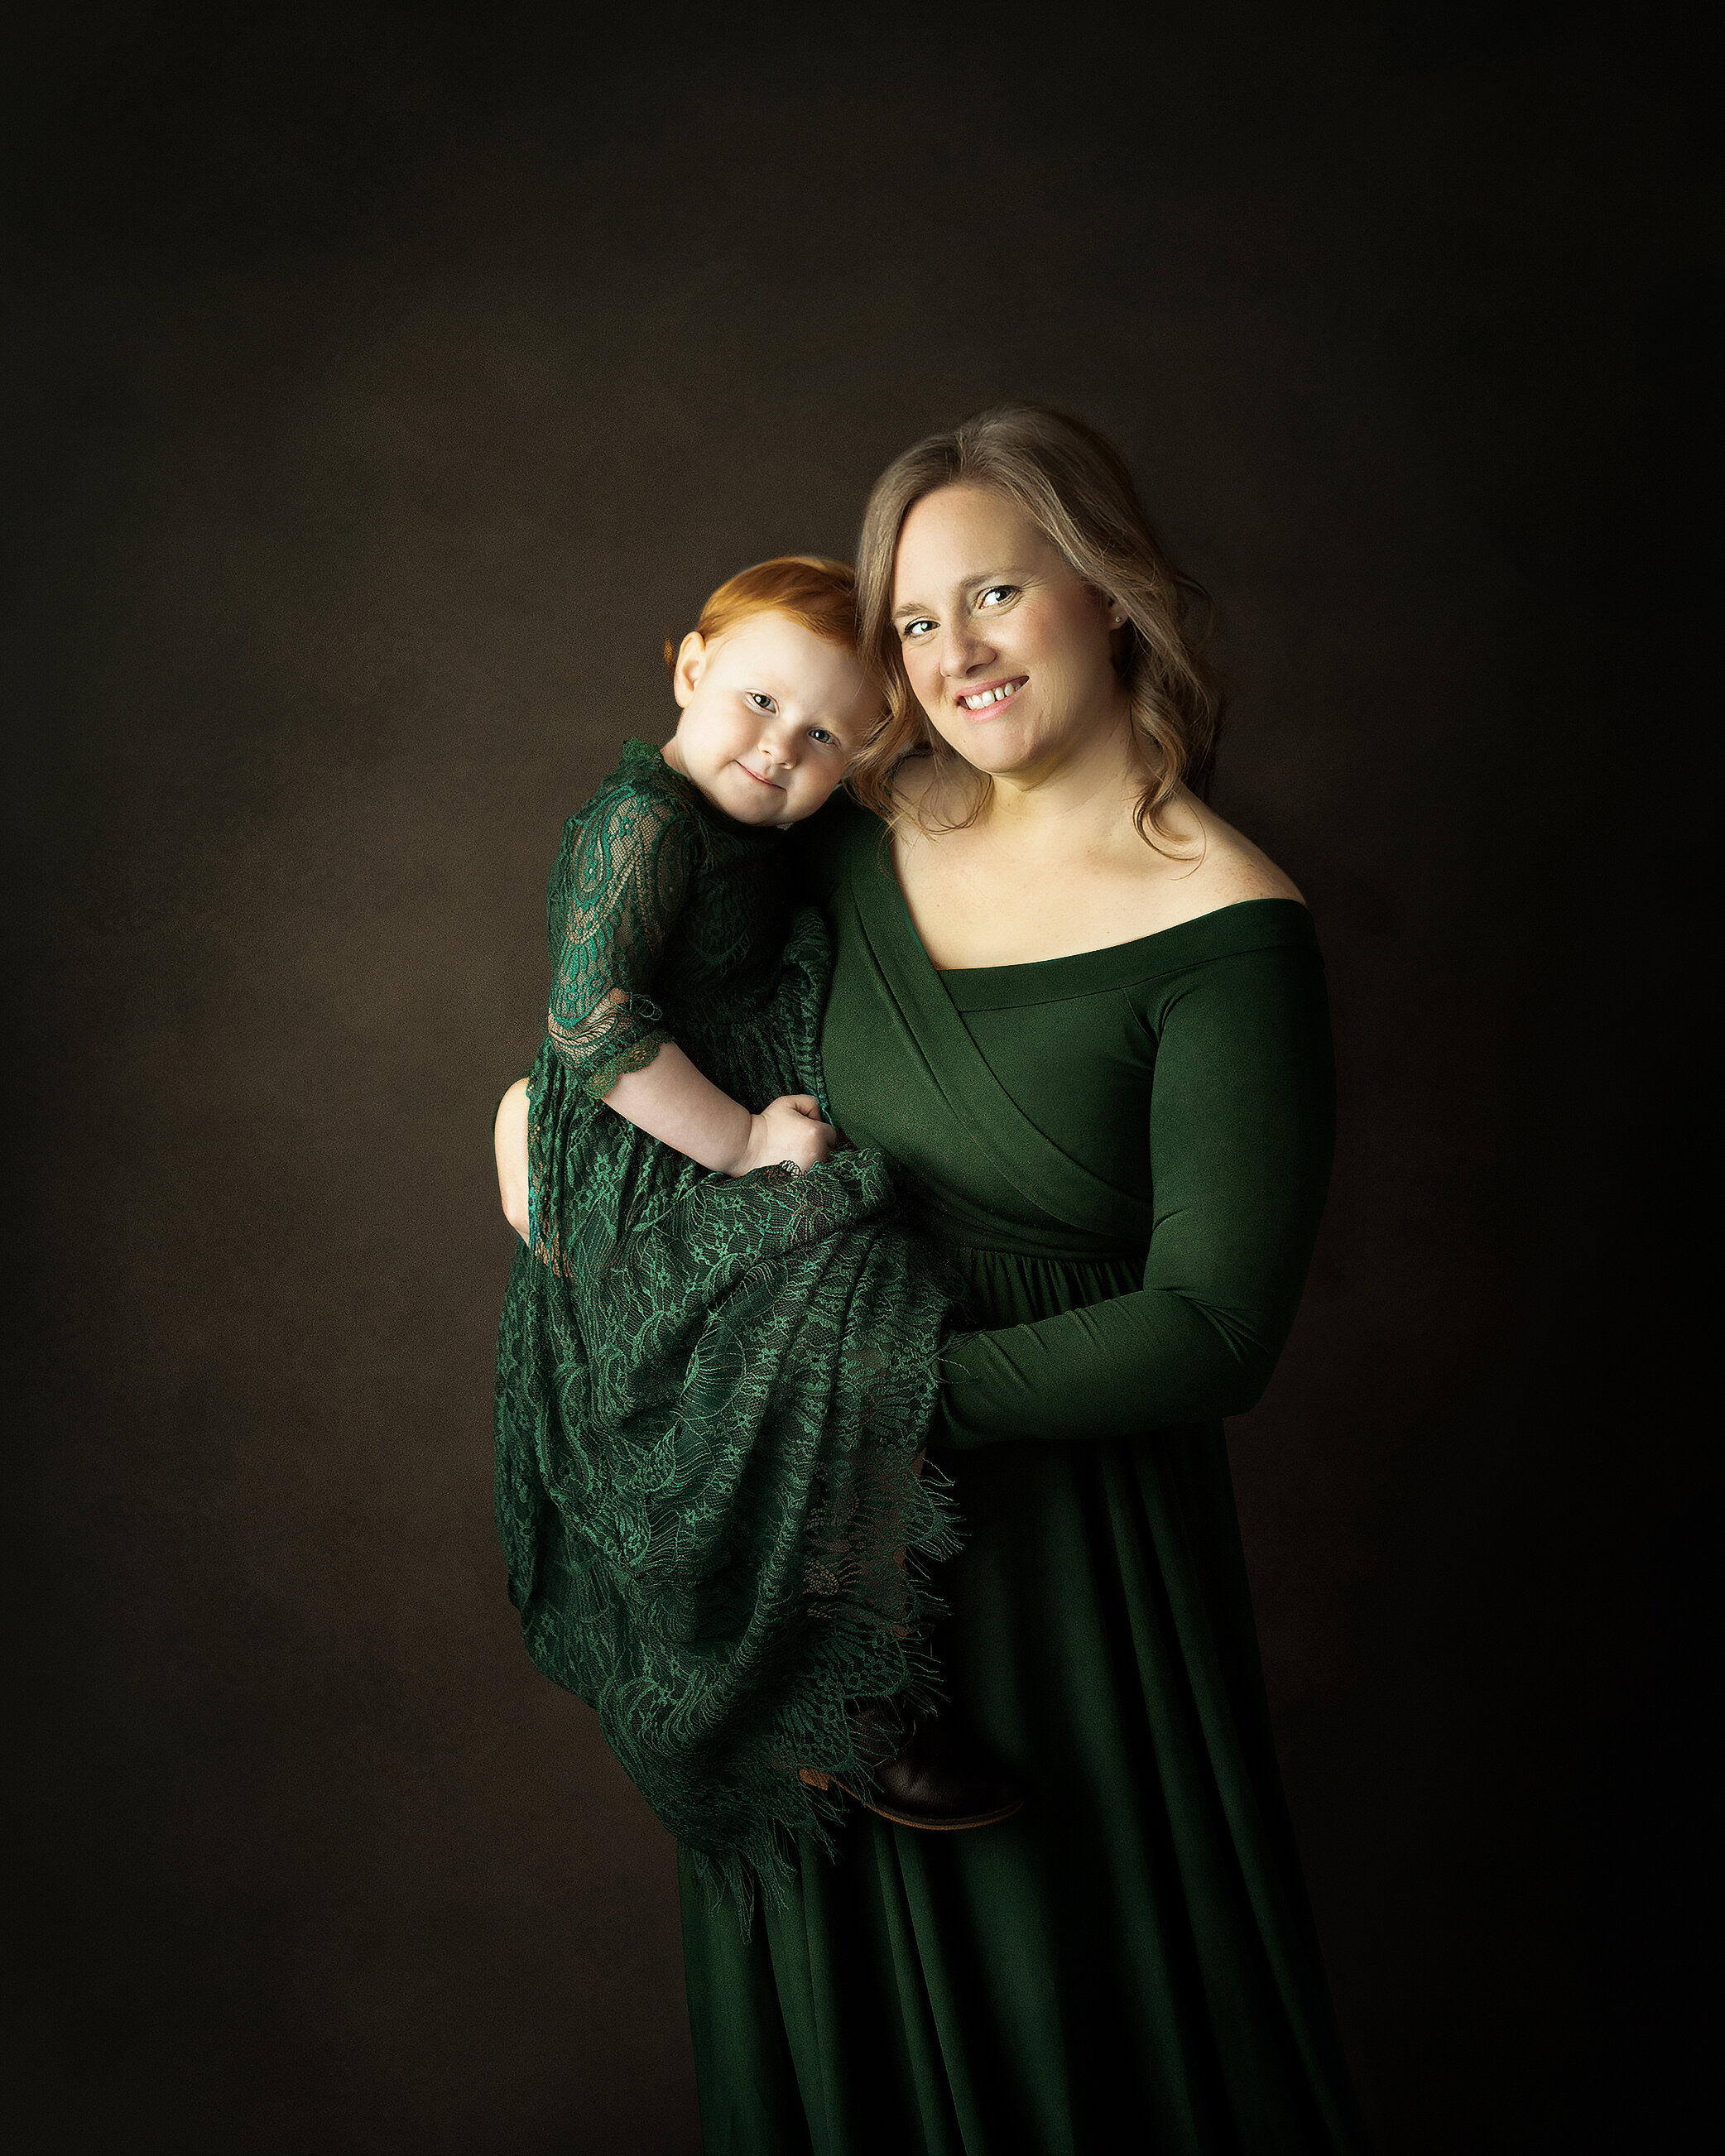 mommy and me fine art vintage style classic photographer baltimore harford howard md maryland.jpg